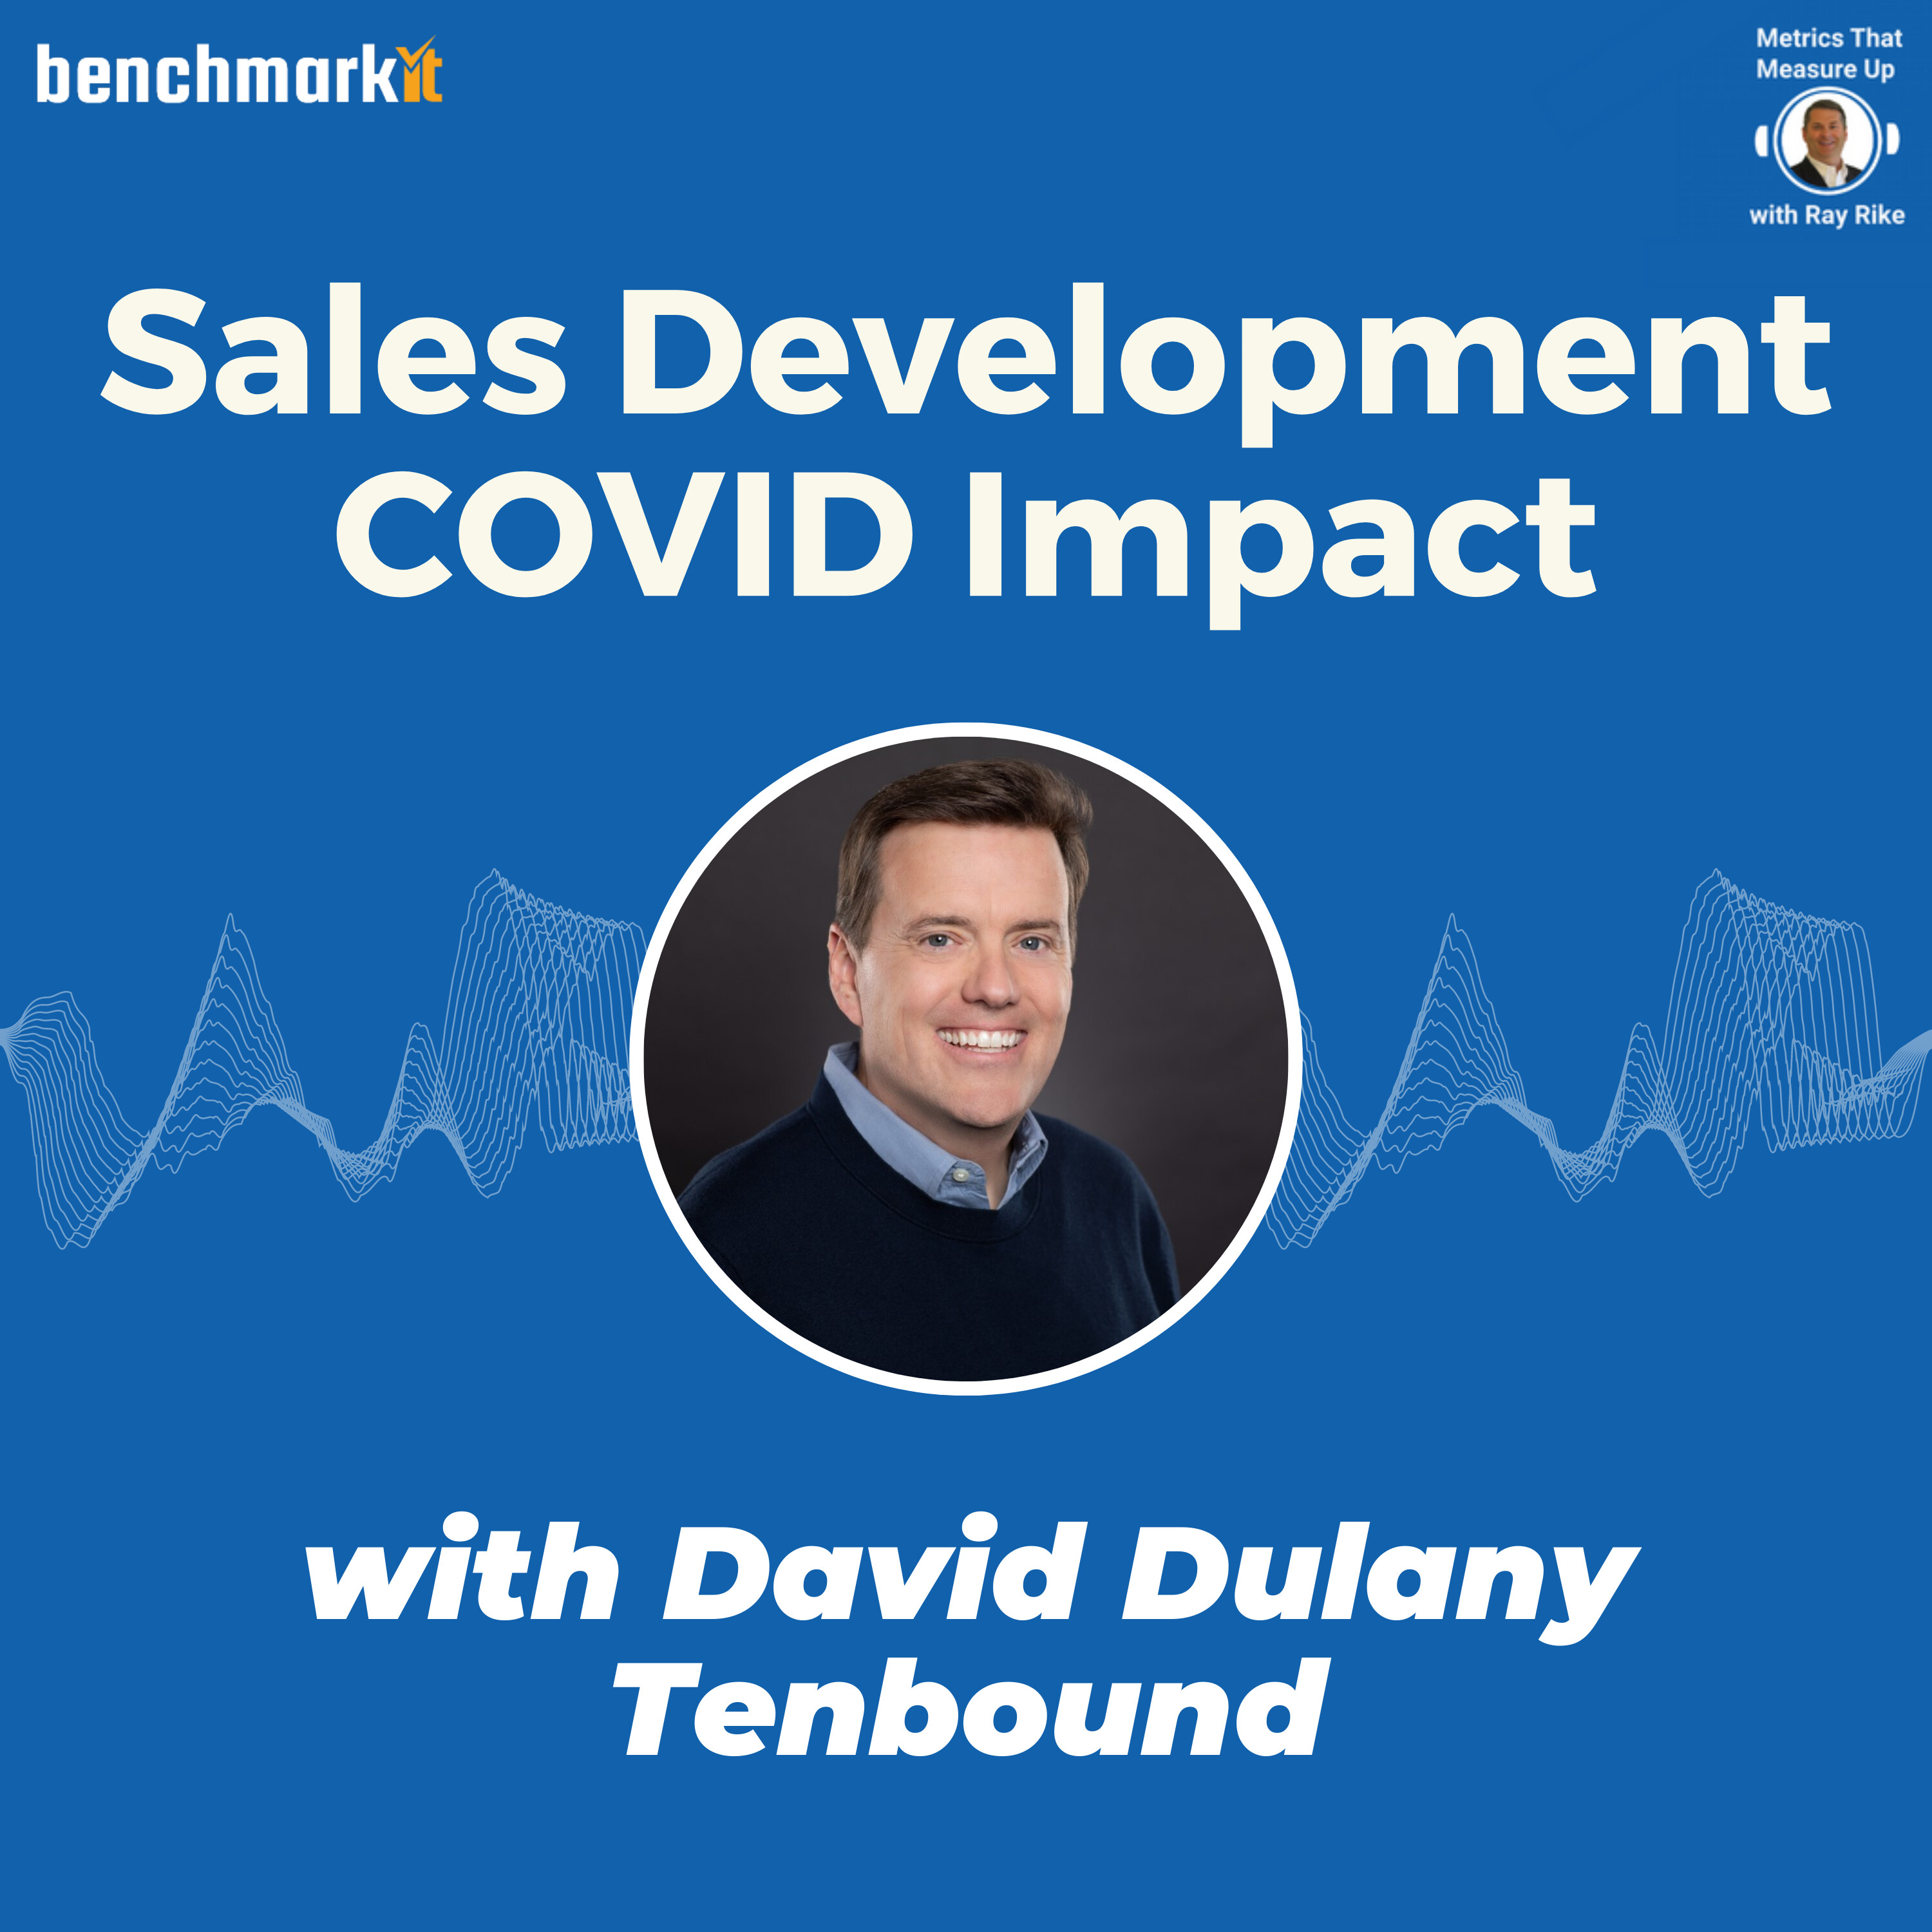 Sales Development in SaaS - Question and Answer Session with David Dulany - Tenbound